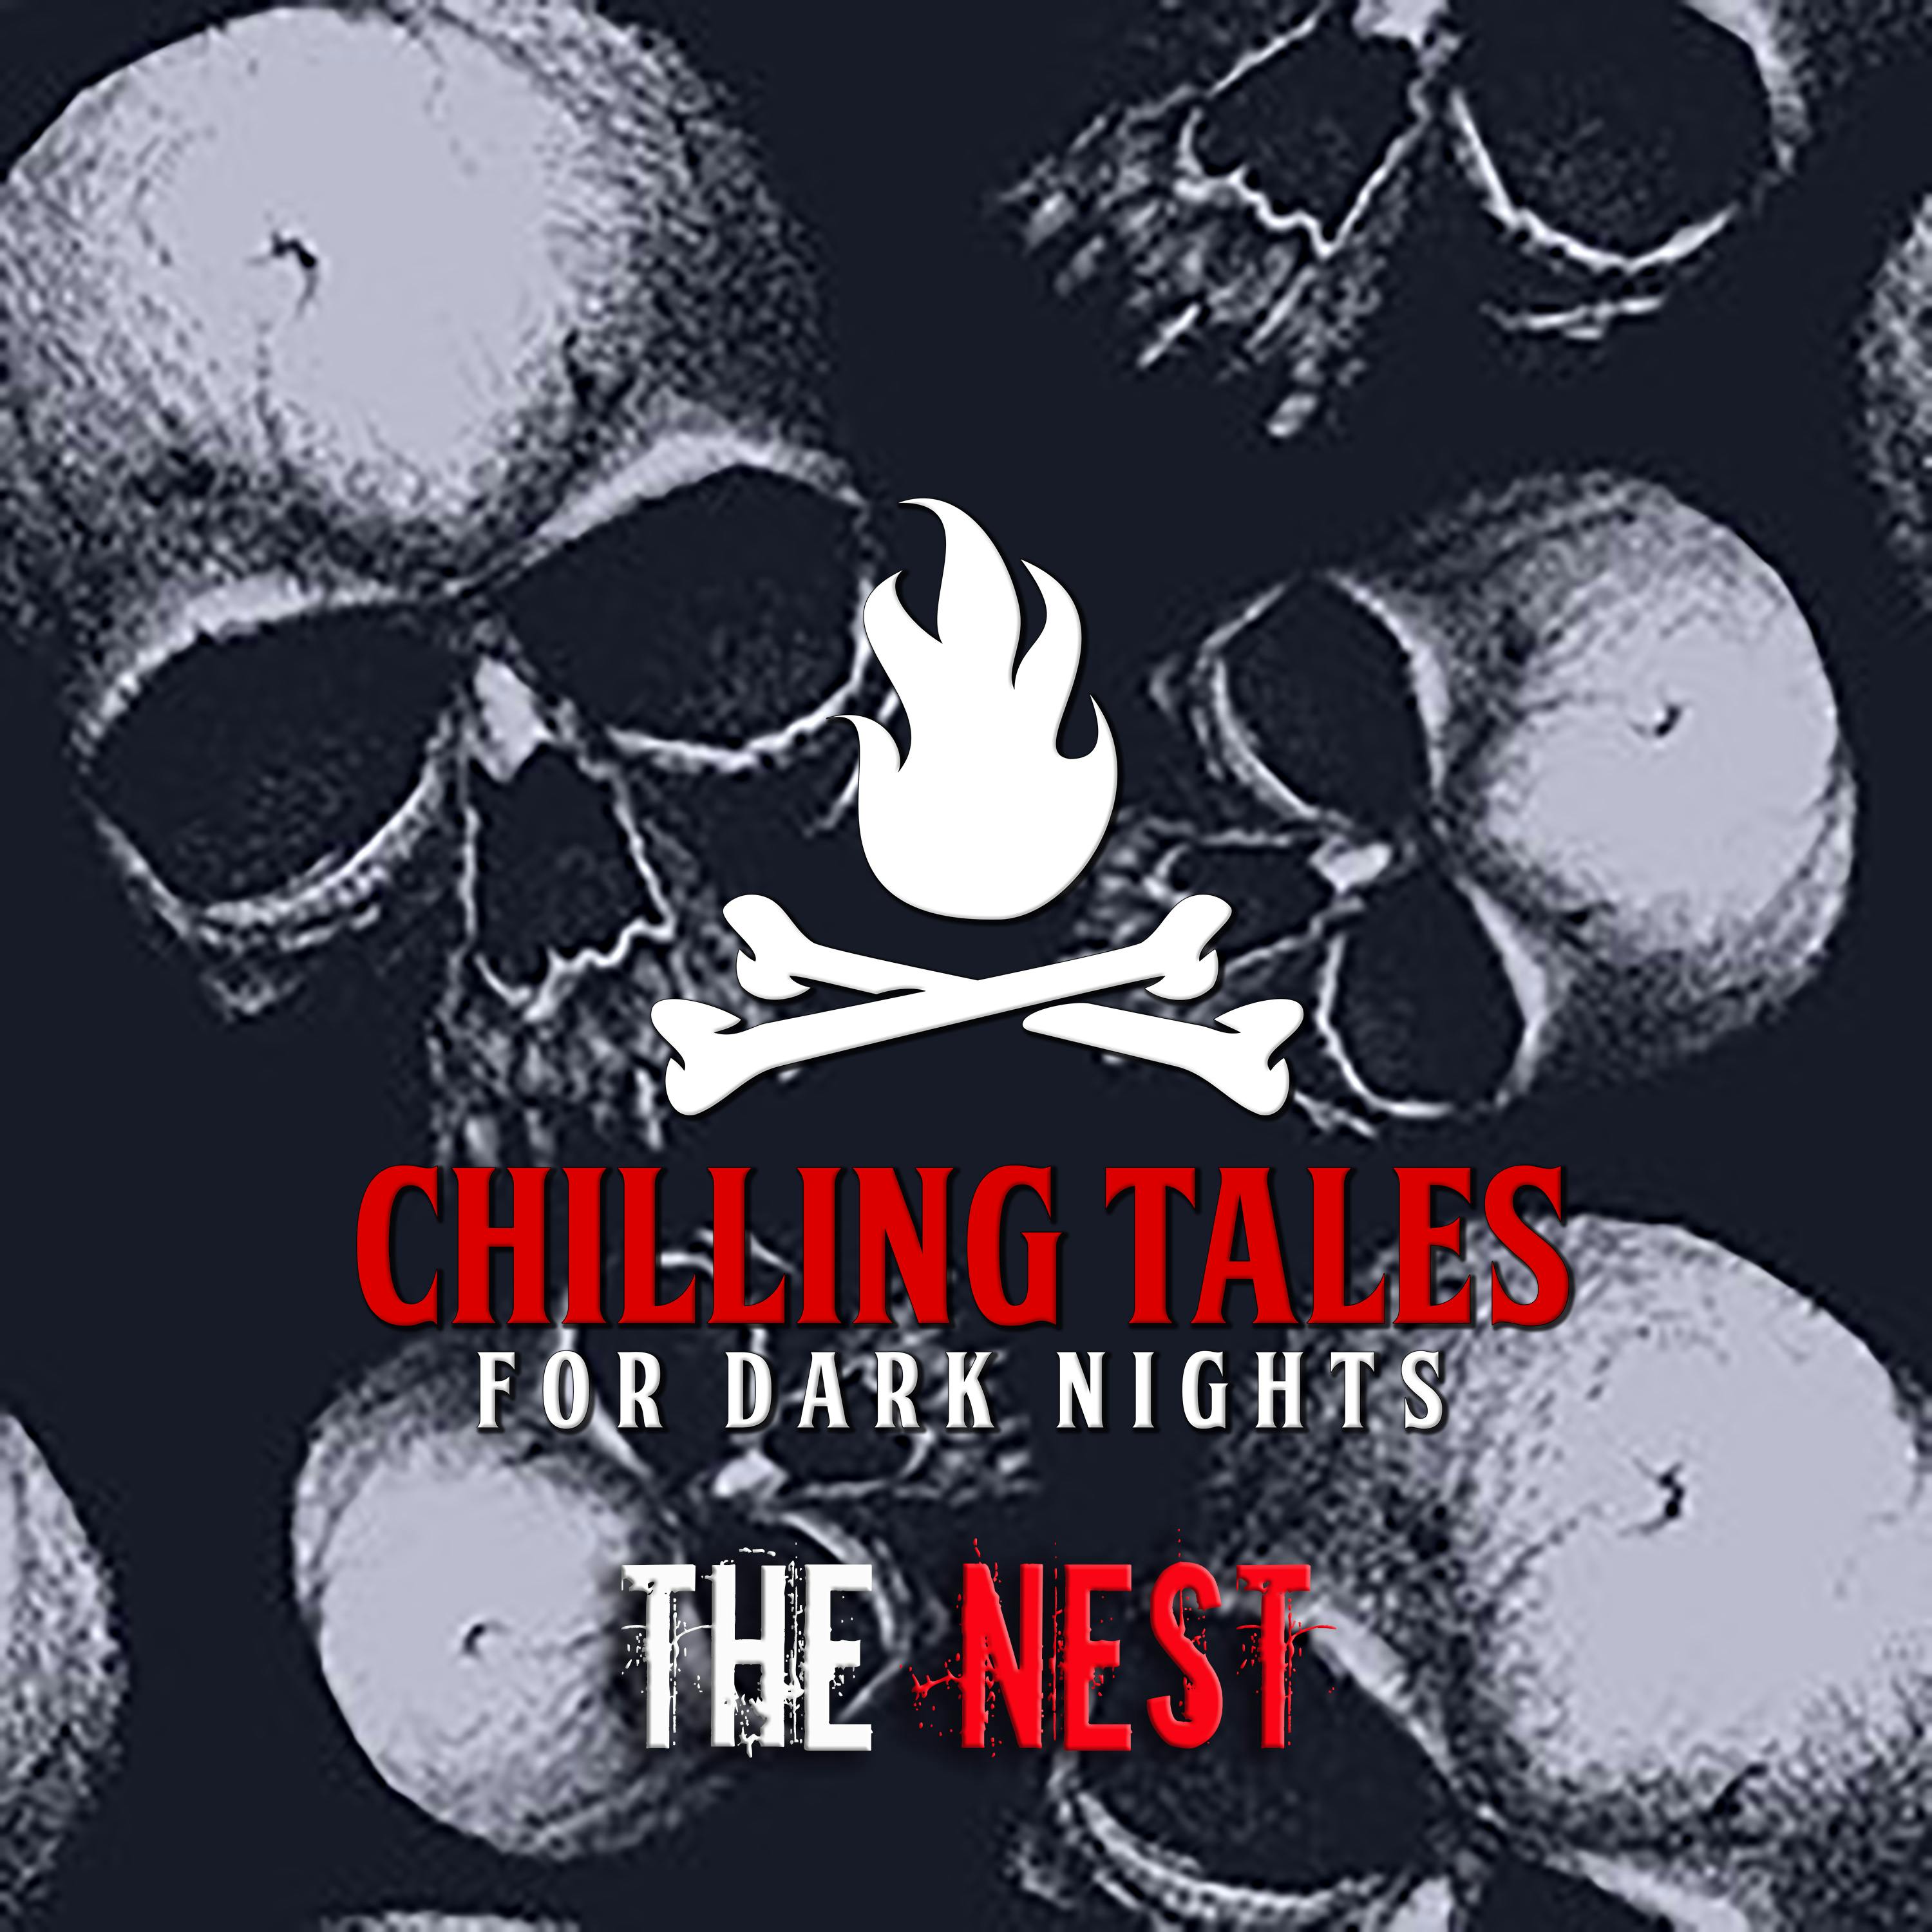 208: The Nest - Chilling Tales for Dark Nights